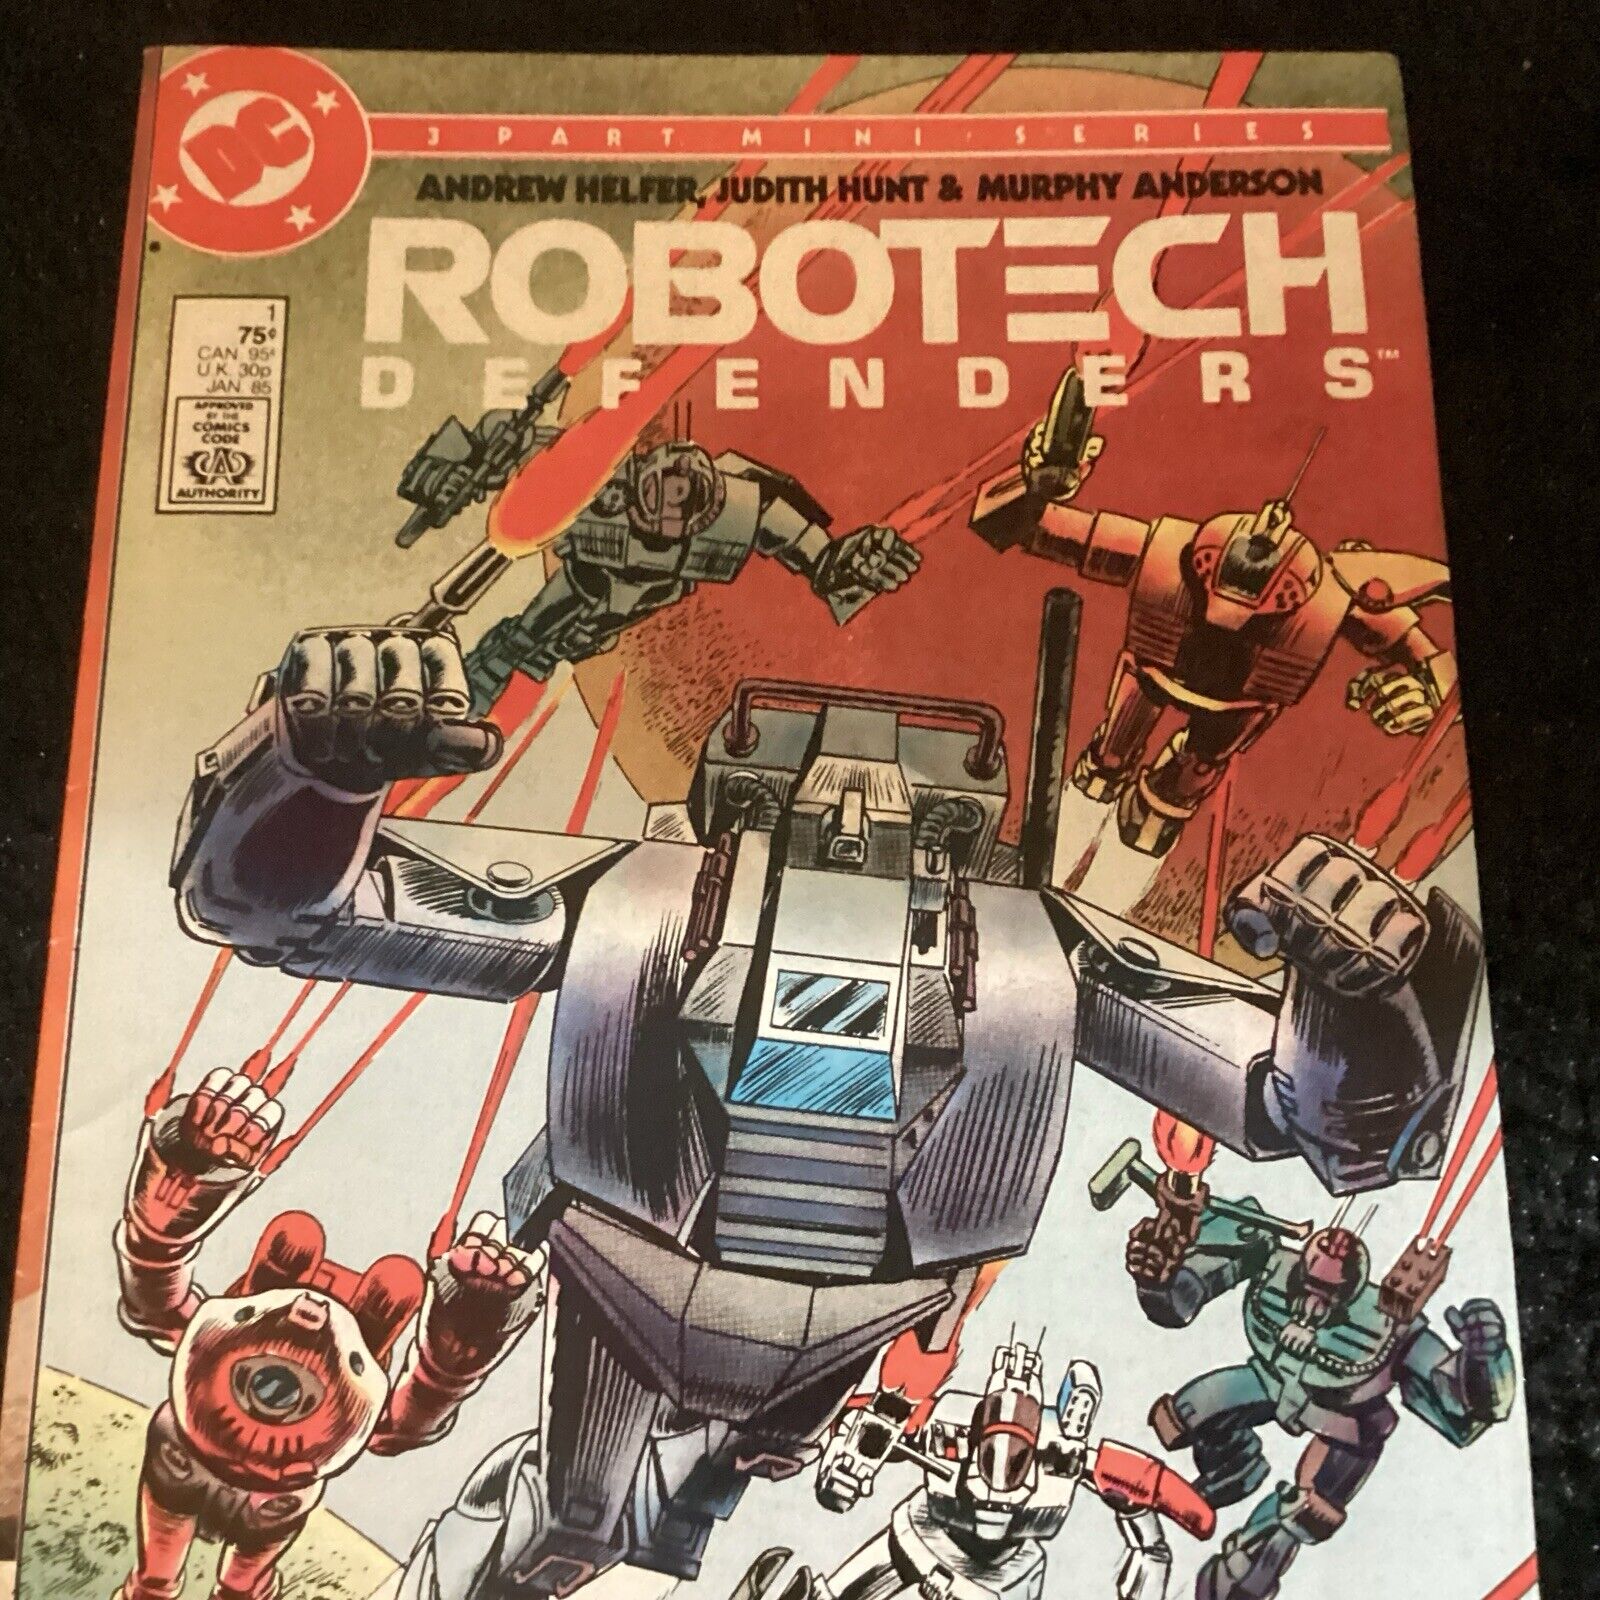 DC Comics Robotech Defenders #1 of 3, January 1985 (The Gathering)